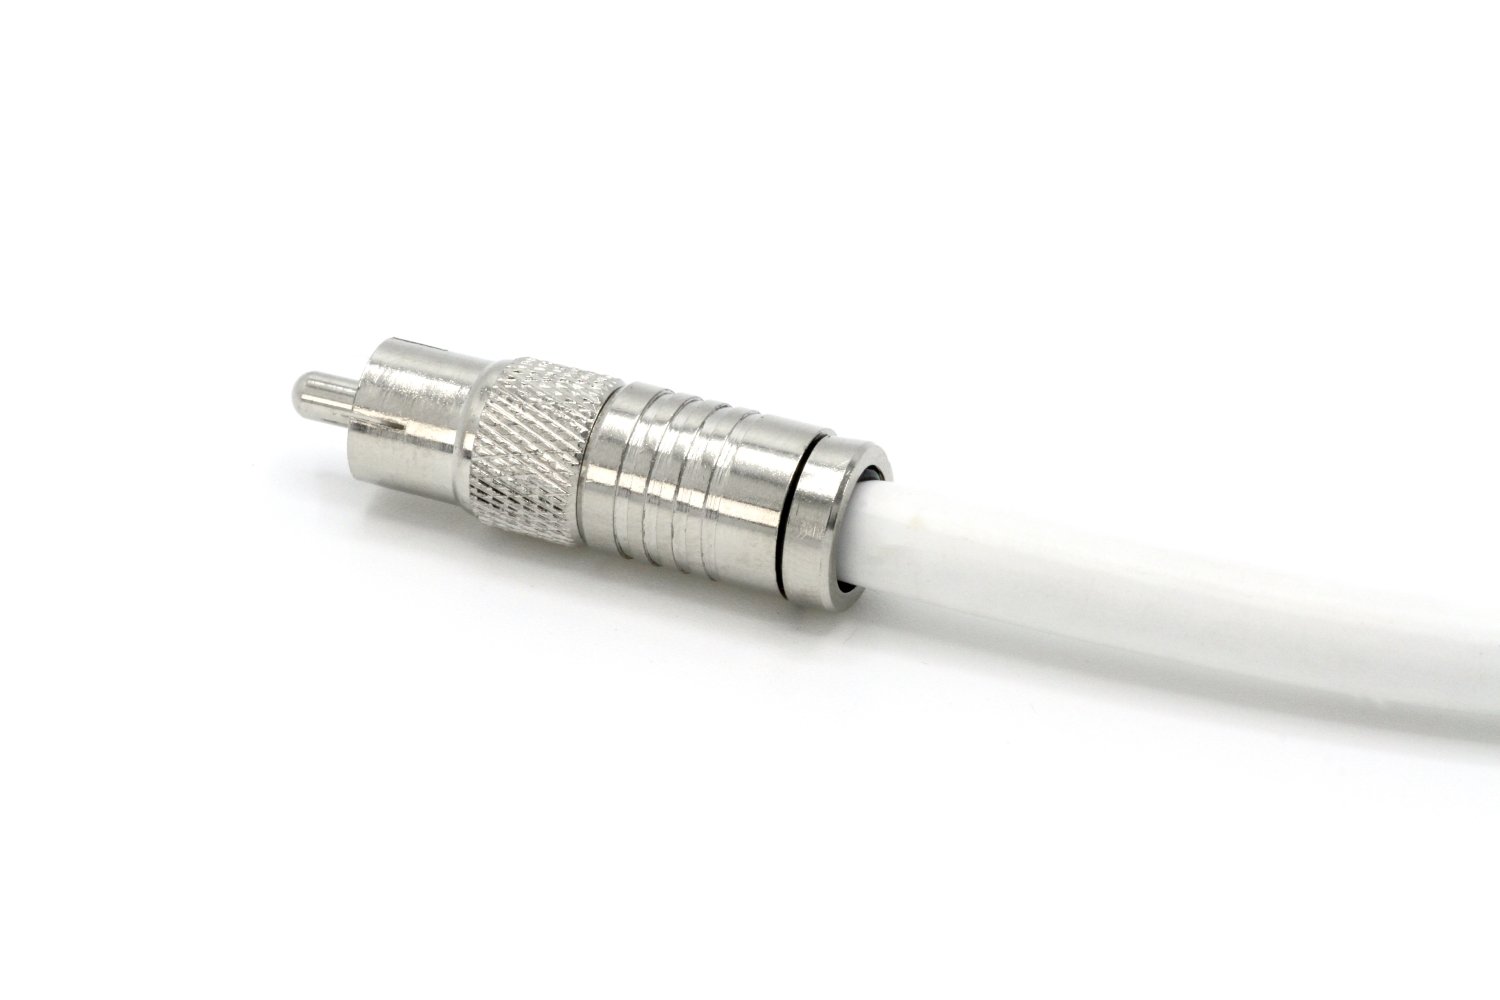 THE CIMPLE CO - White Digital Audio Coaxial Cable Subwoofer Cable - (S/PDIF) RCA Cable, 200 Feet - image 3 of 6